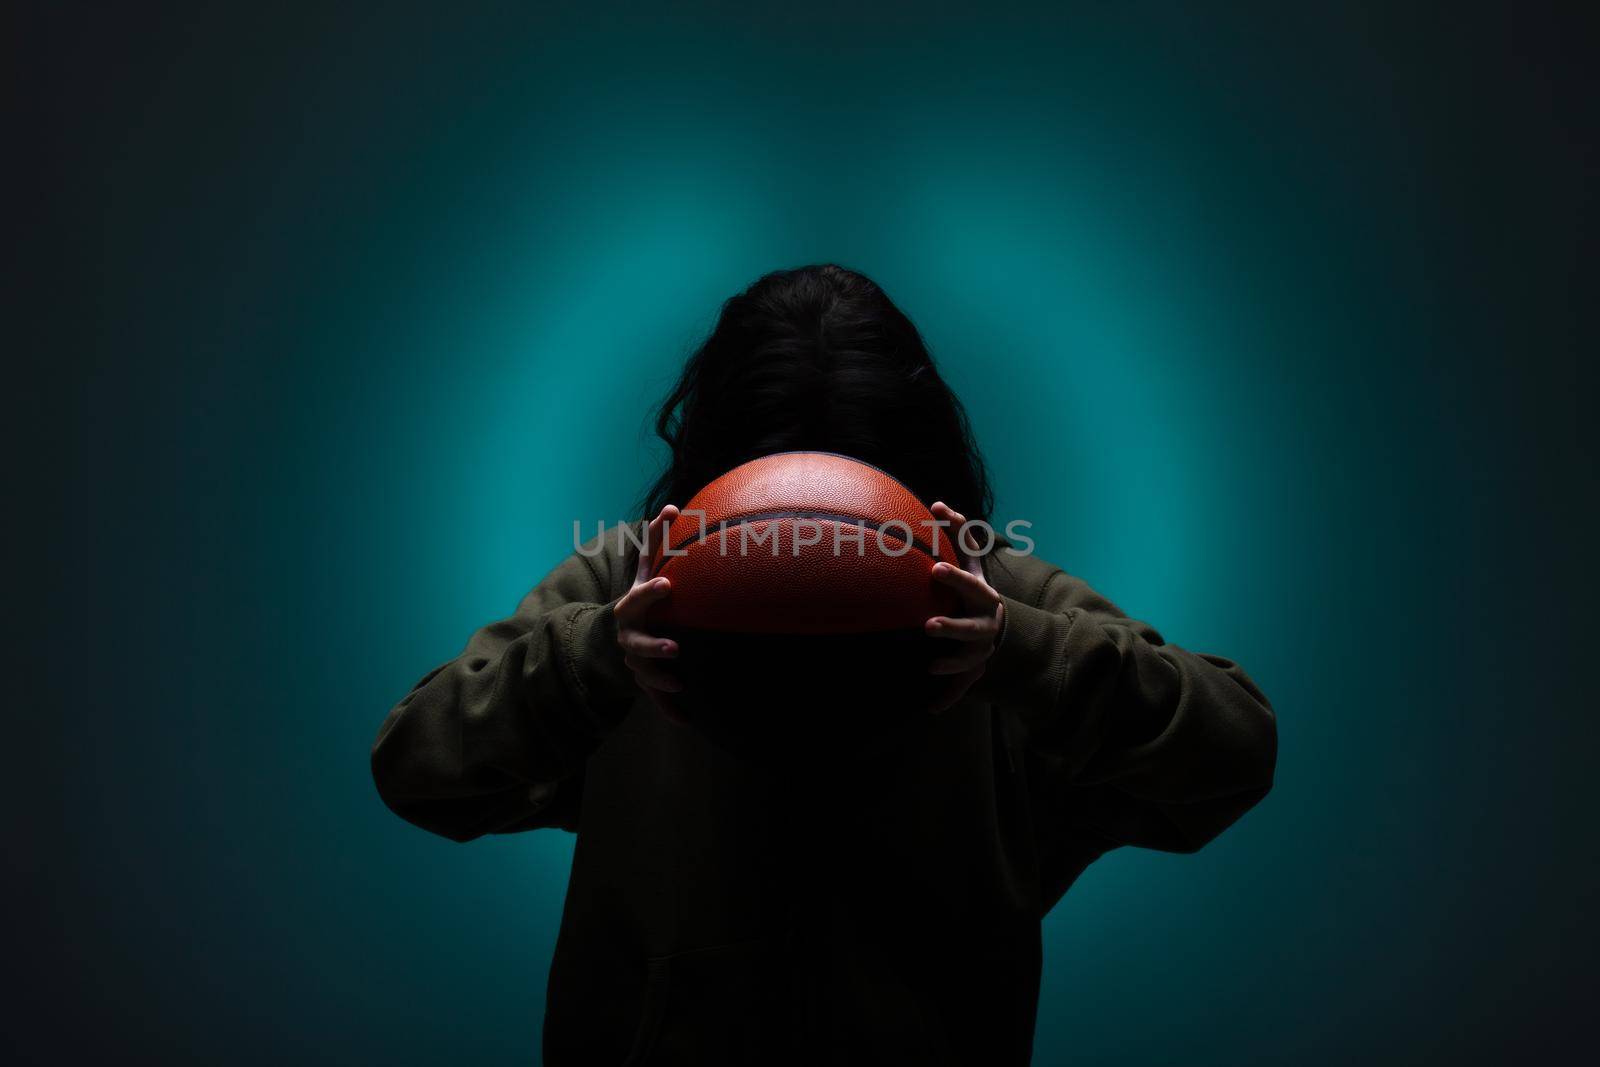 Teenage girl with basketball. Silhouette studio portrait with neon blue colored background. by kokimk